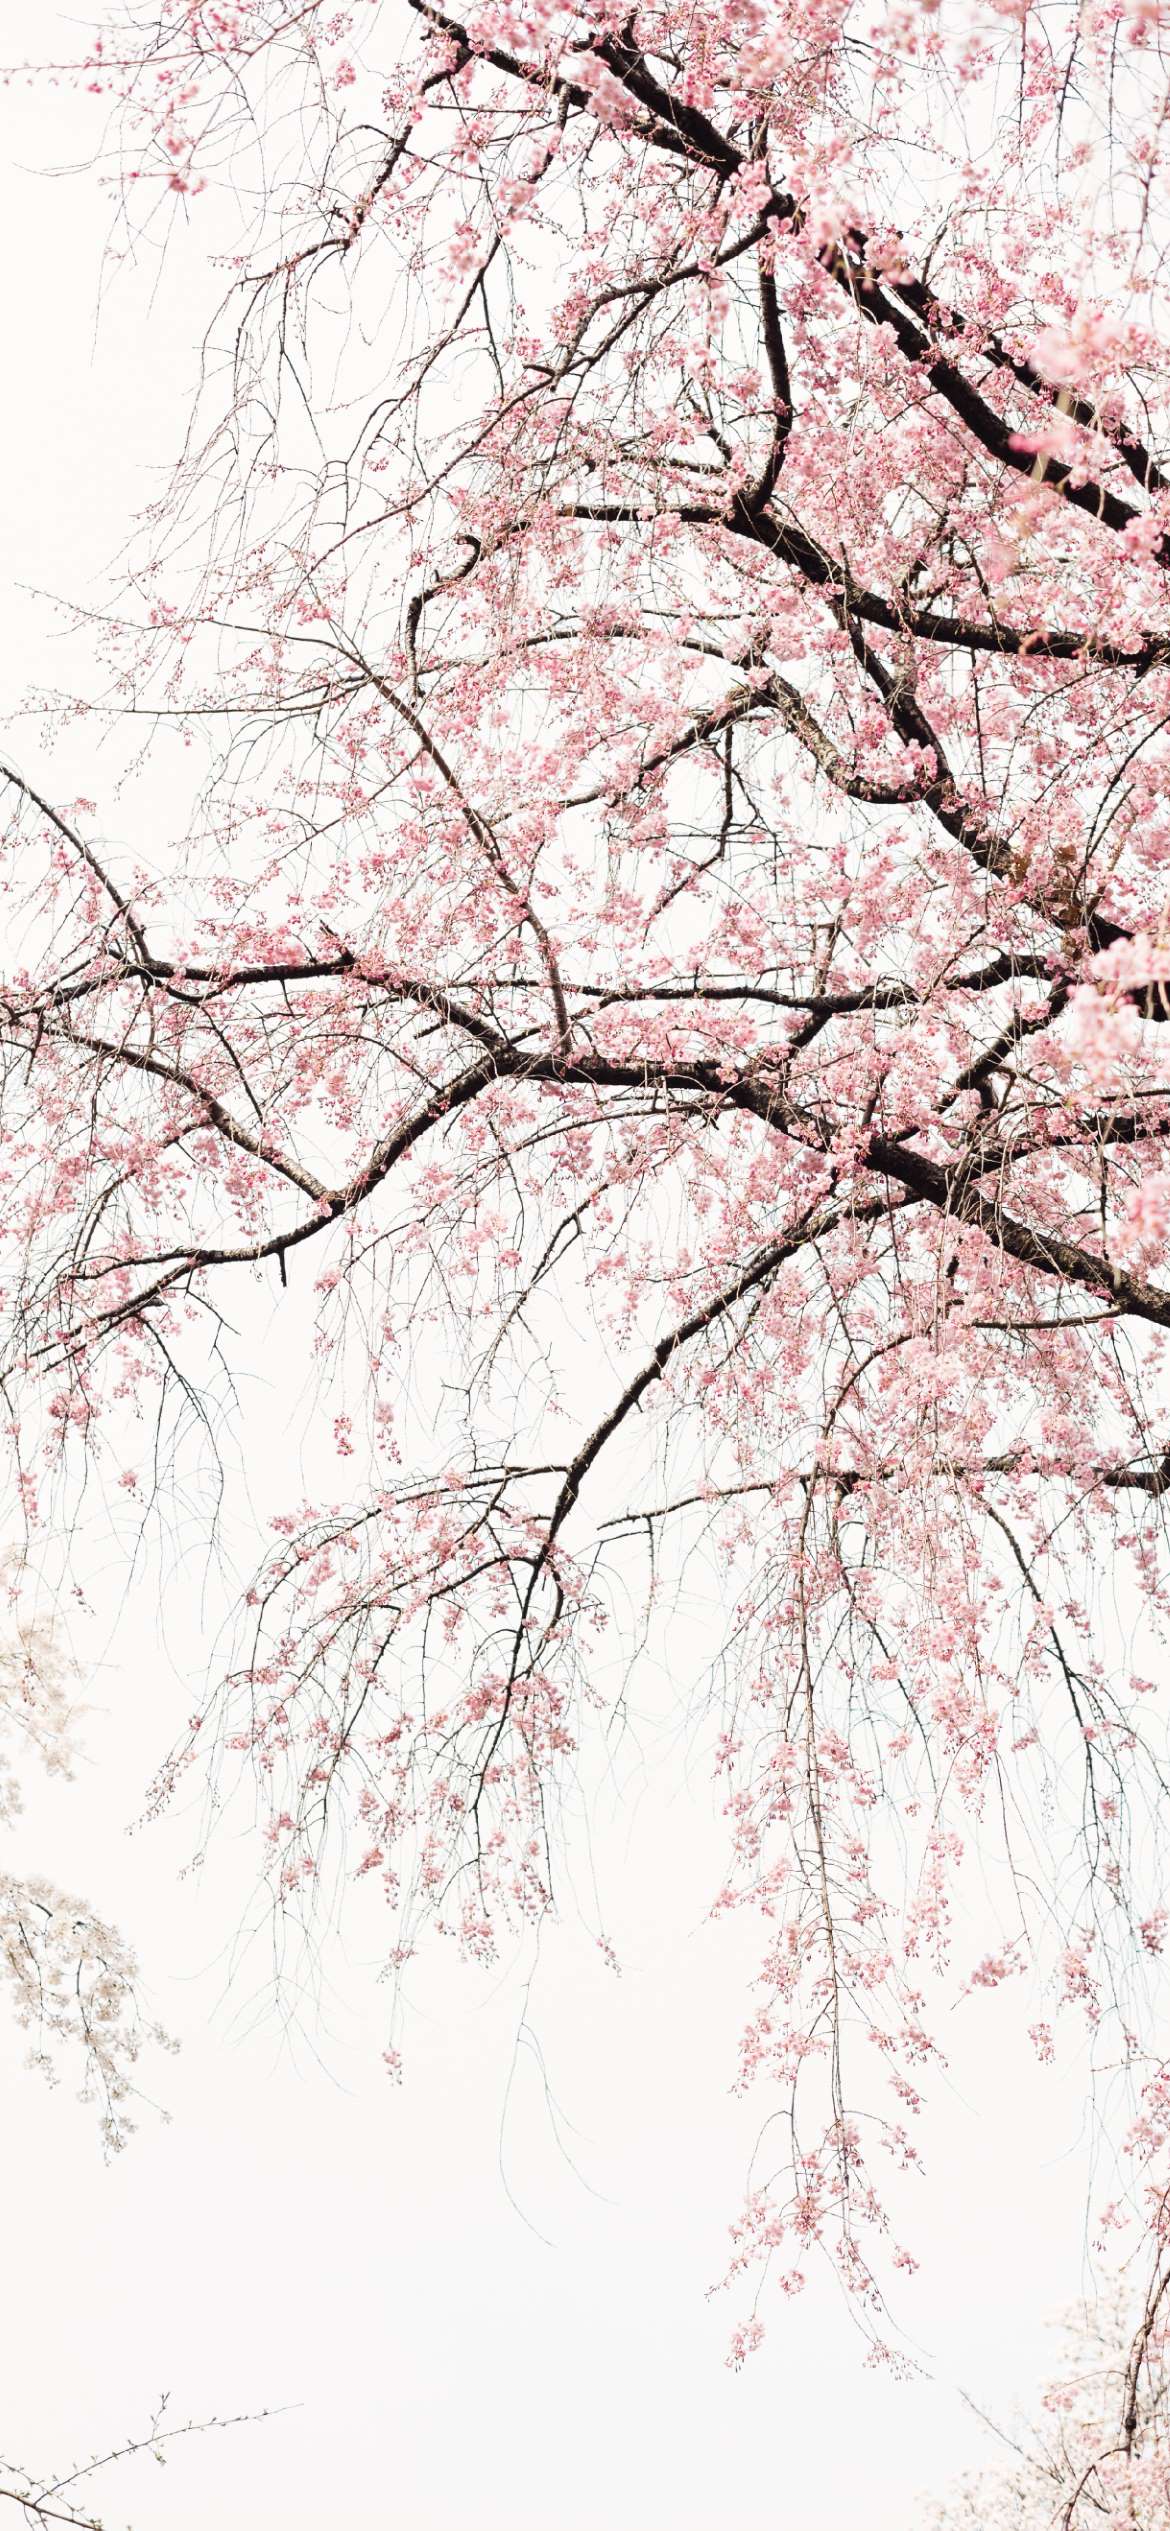 A tree with pink flowers in it - Valentine's Day